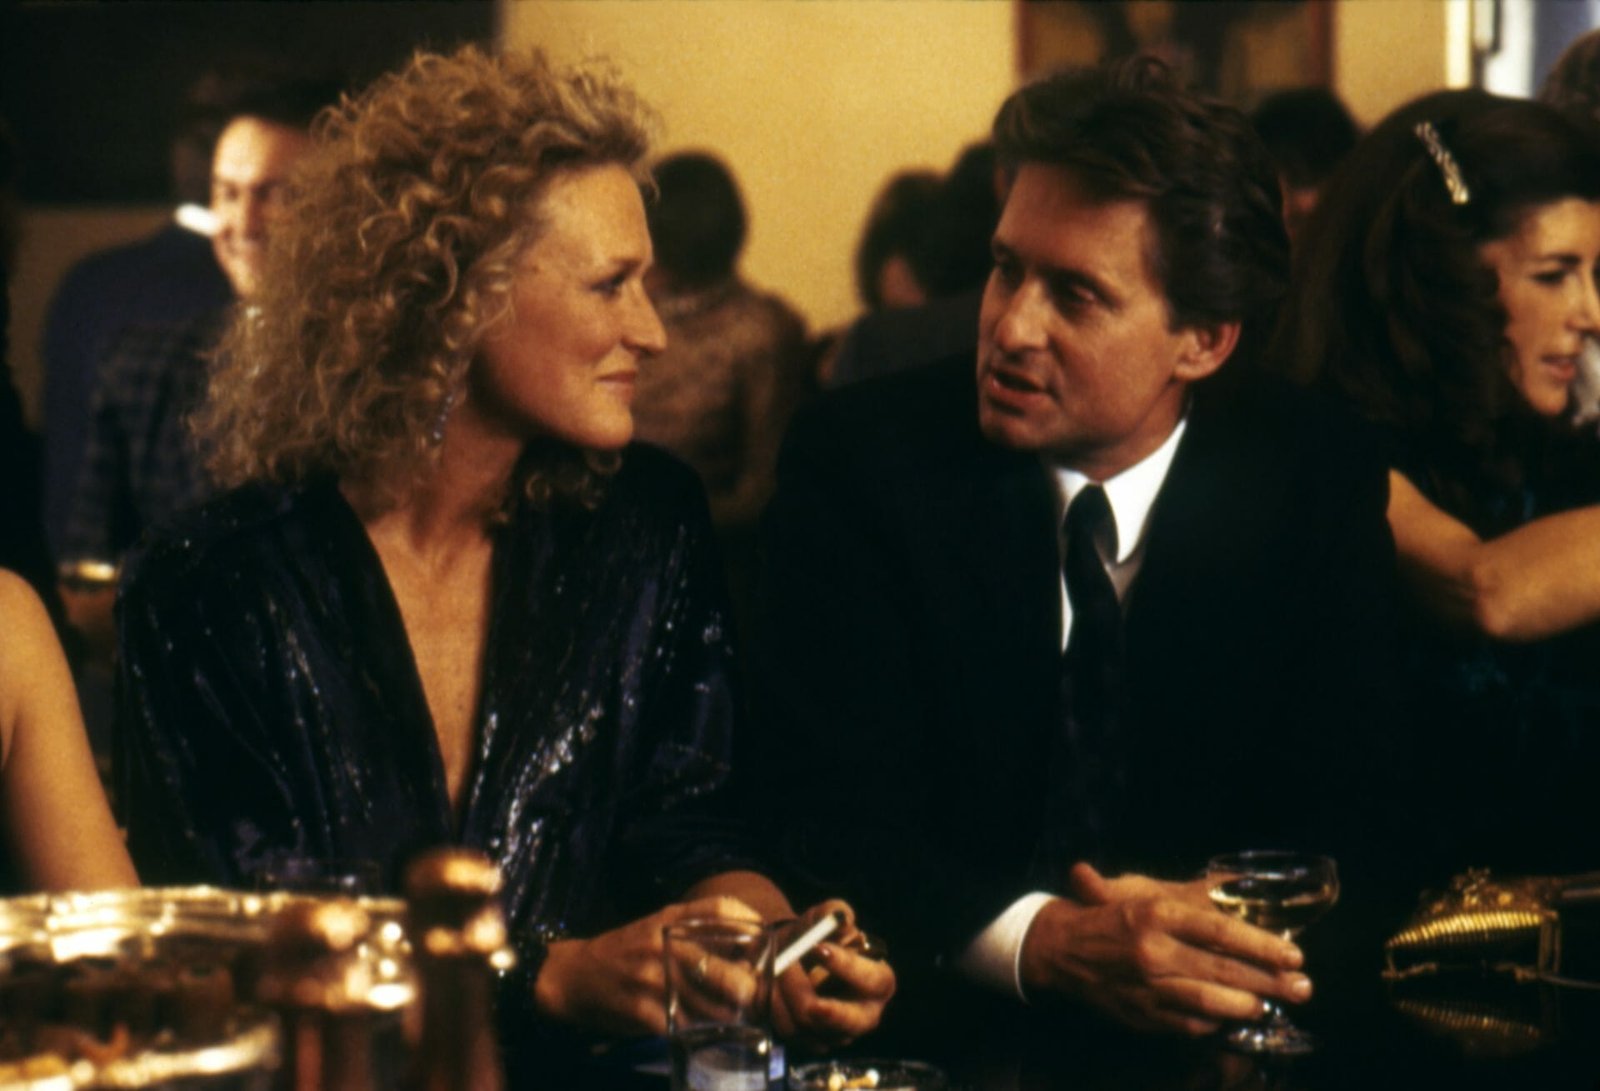 Best 80s movies: Fatal Attraction (1987)